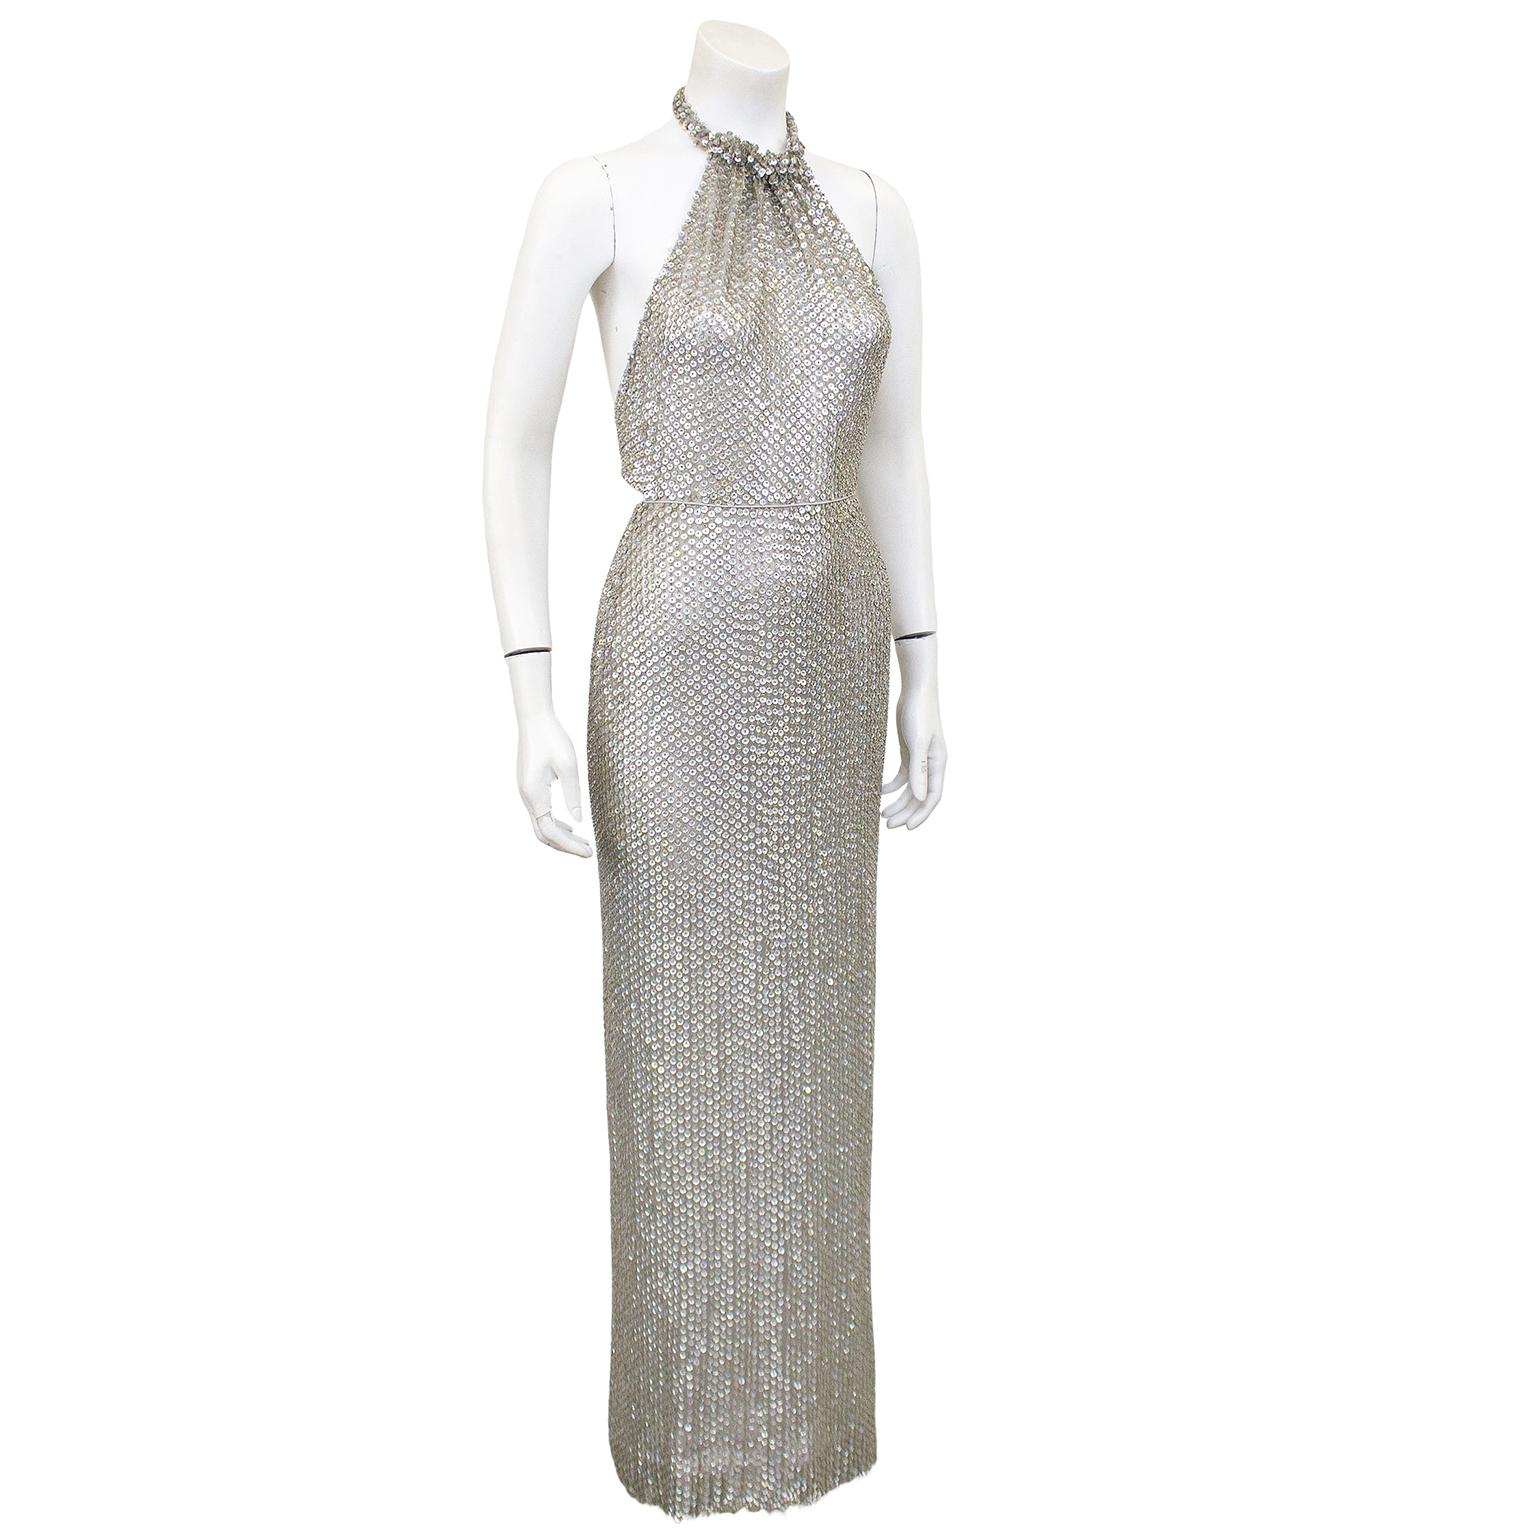 Show stopping silver sequin on chiffon Oscar de la Renta gown from the 1980s. Features a twisted halter neckline and an open back with a thin tie closure. Super sexy, skims the body beautifully. In excellent vintage condition, all original sequins